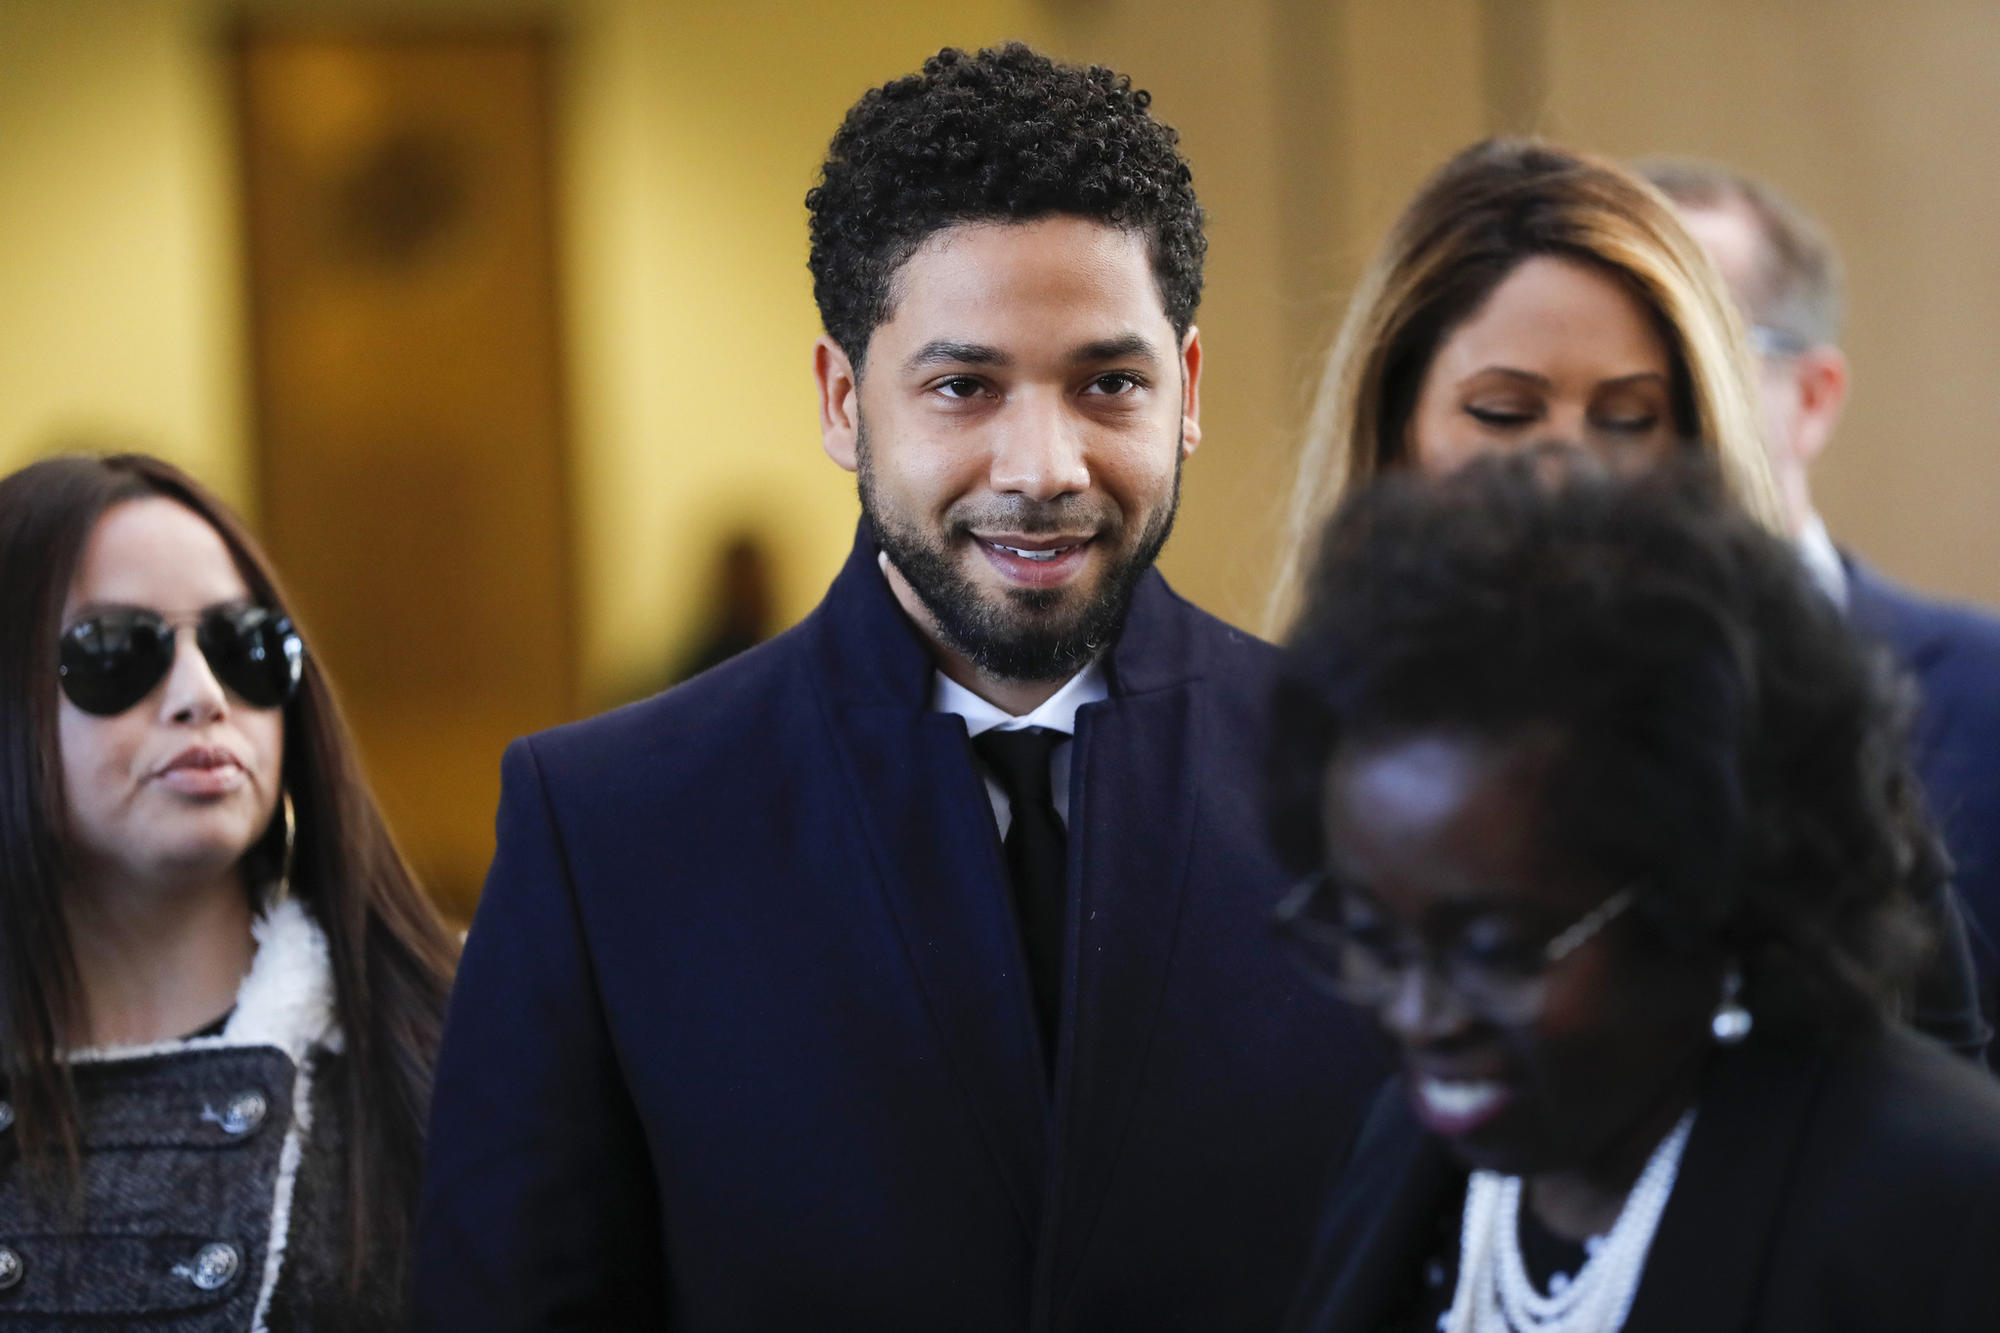 In latest plot twist, Cook County prosecutors abruptly drop all charges against Jussie ...2000 x 1333